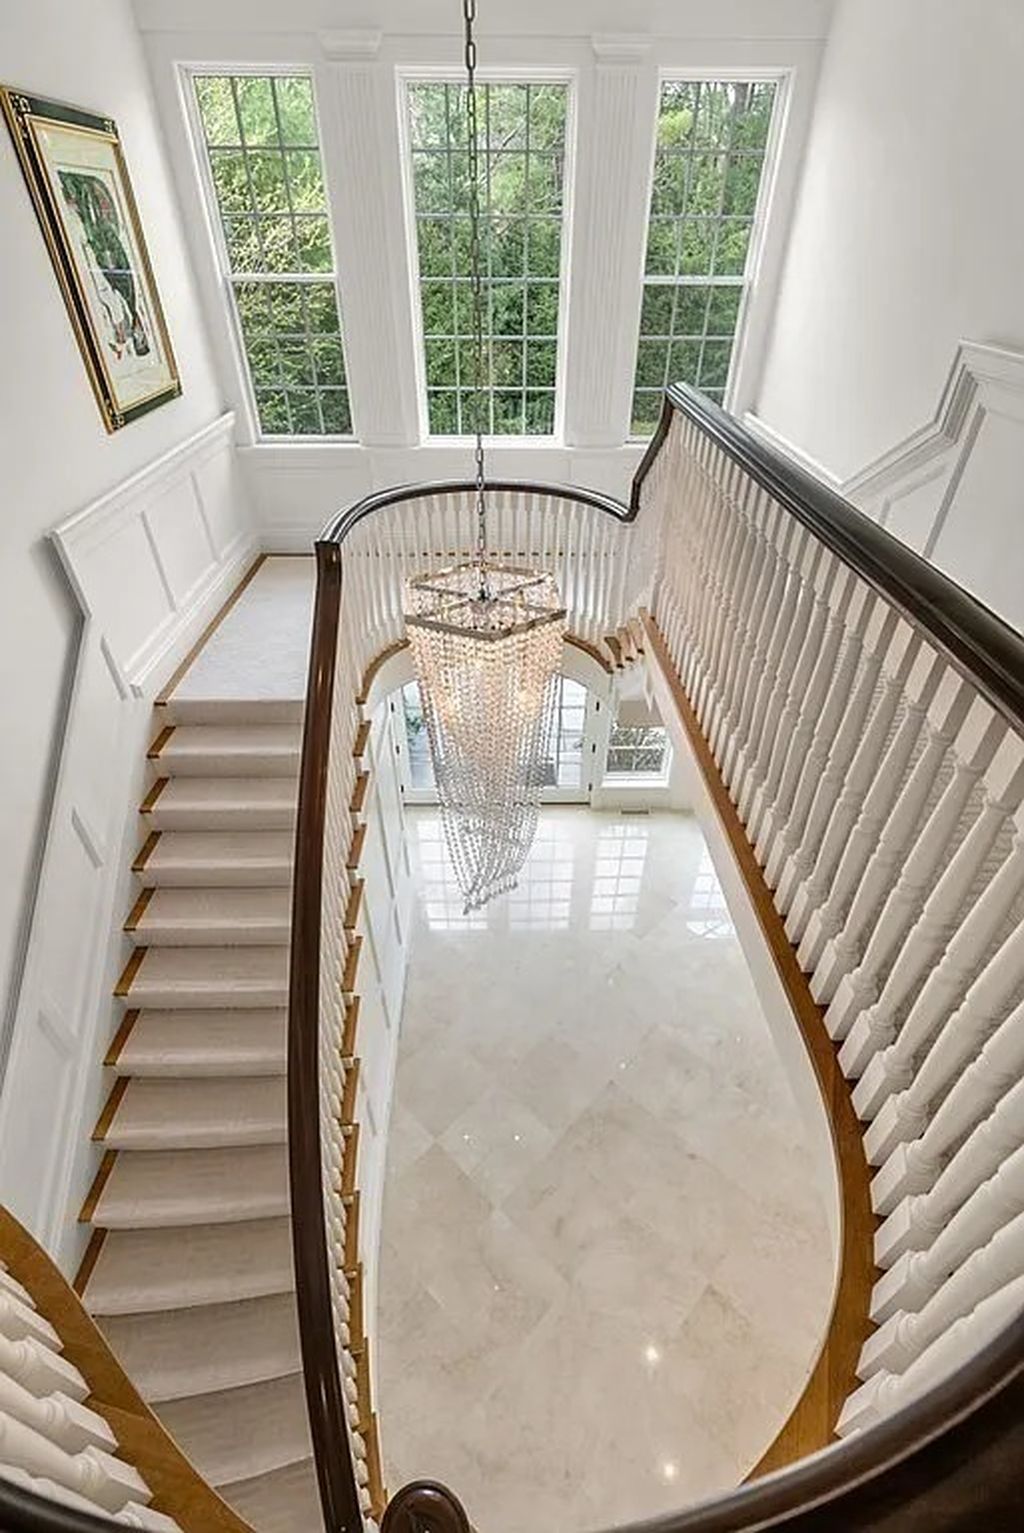 The Mansion in Weston offers the ultimate amenities for entertaining on a grand scale, now available for sale. This home located at 140 Meadowbrook Rd, Weston, Massachusetts